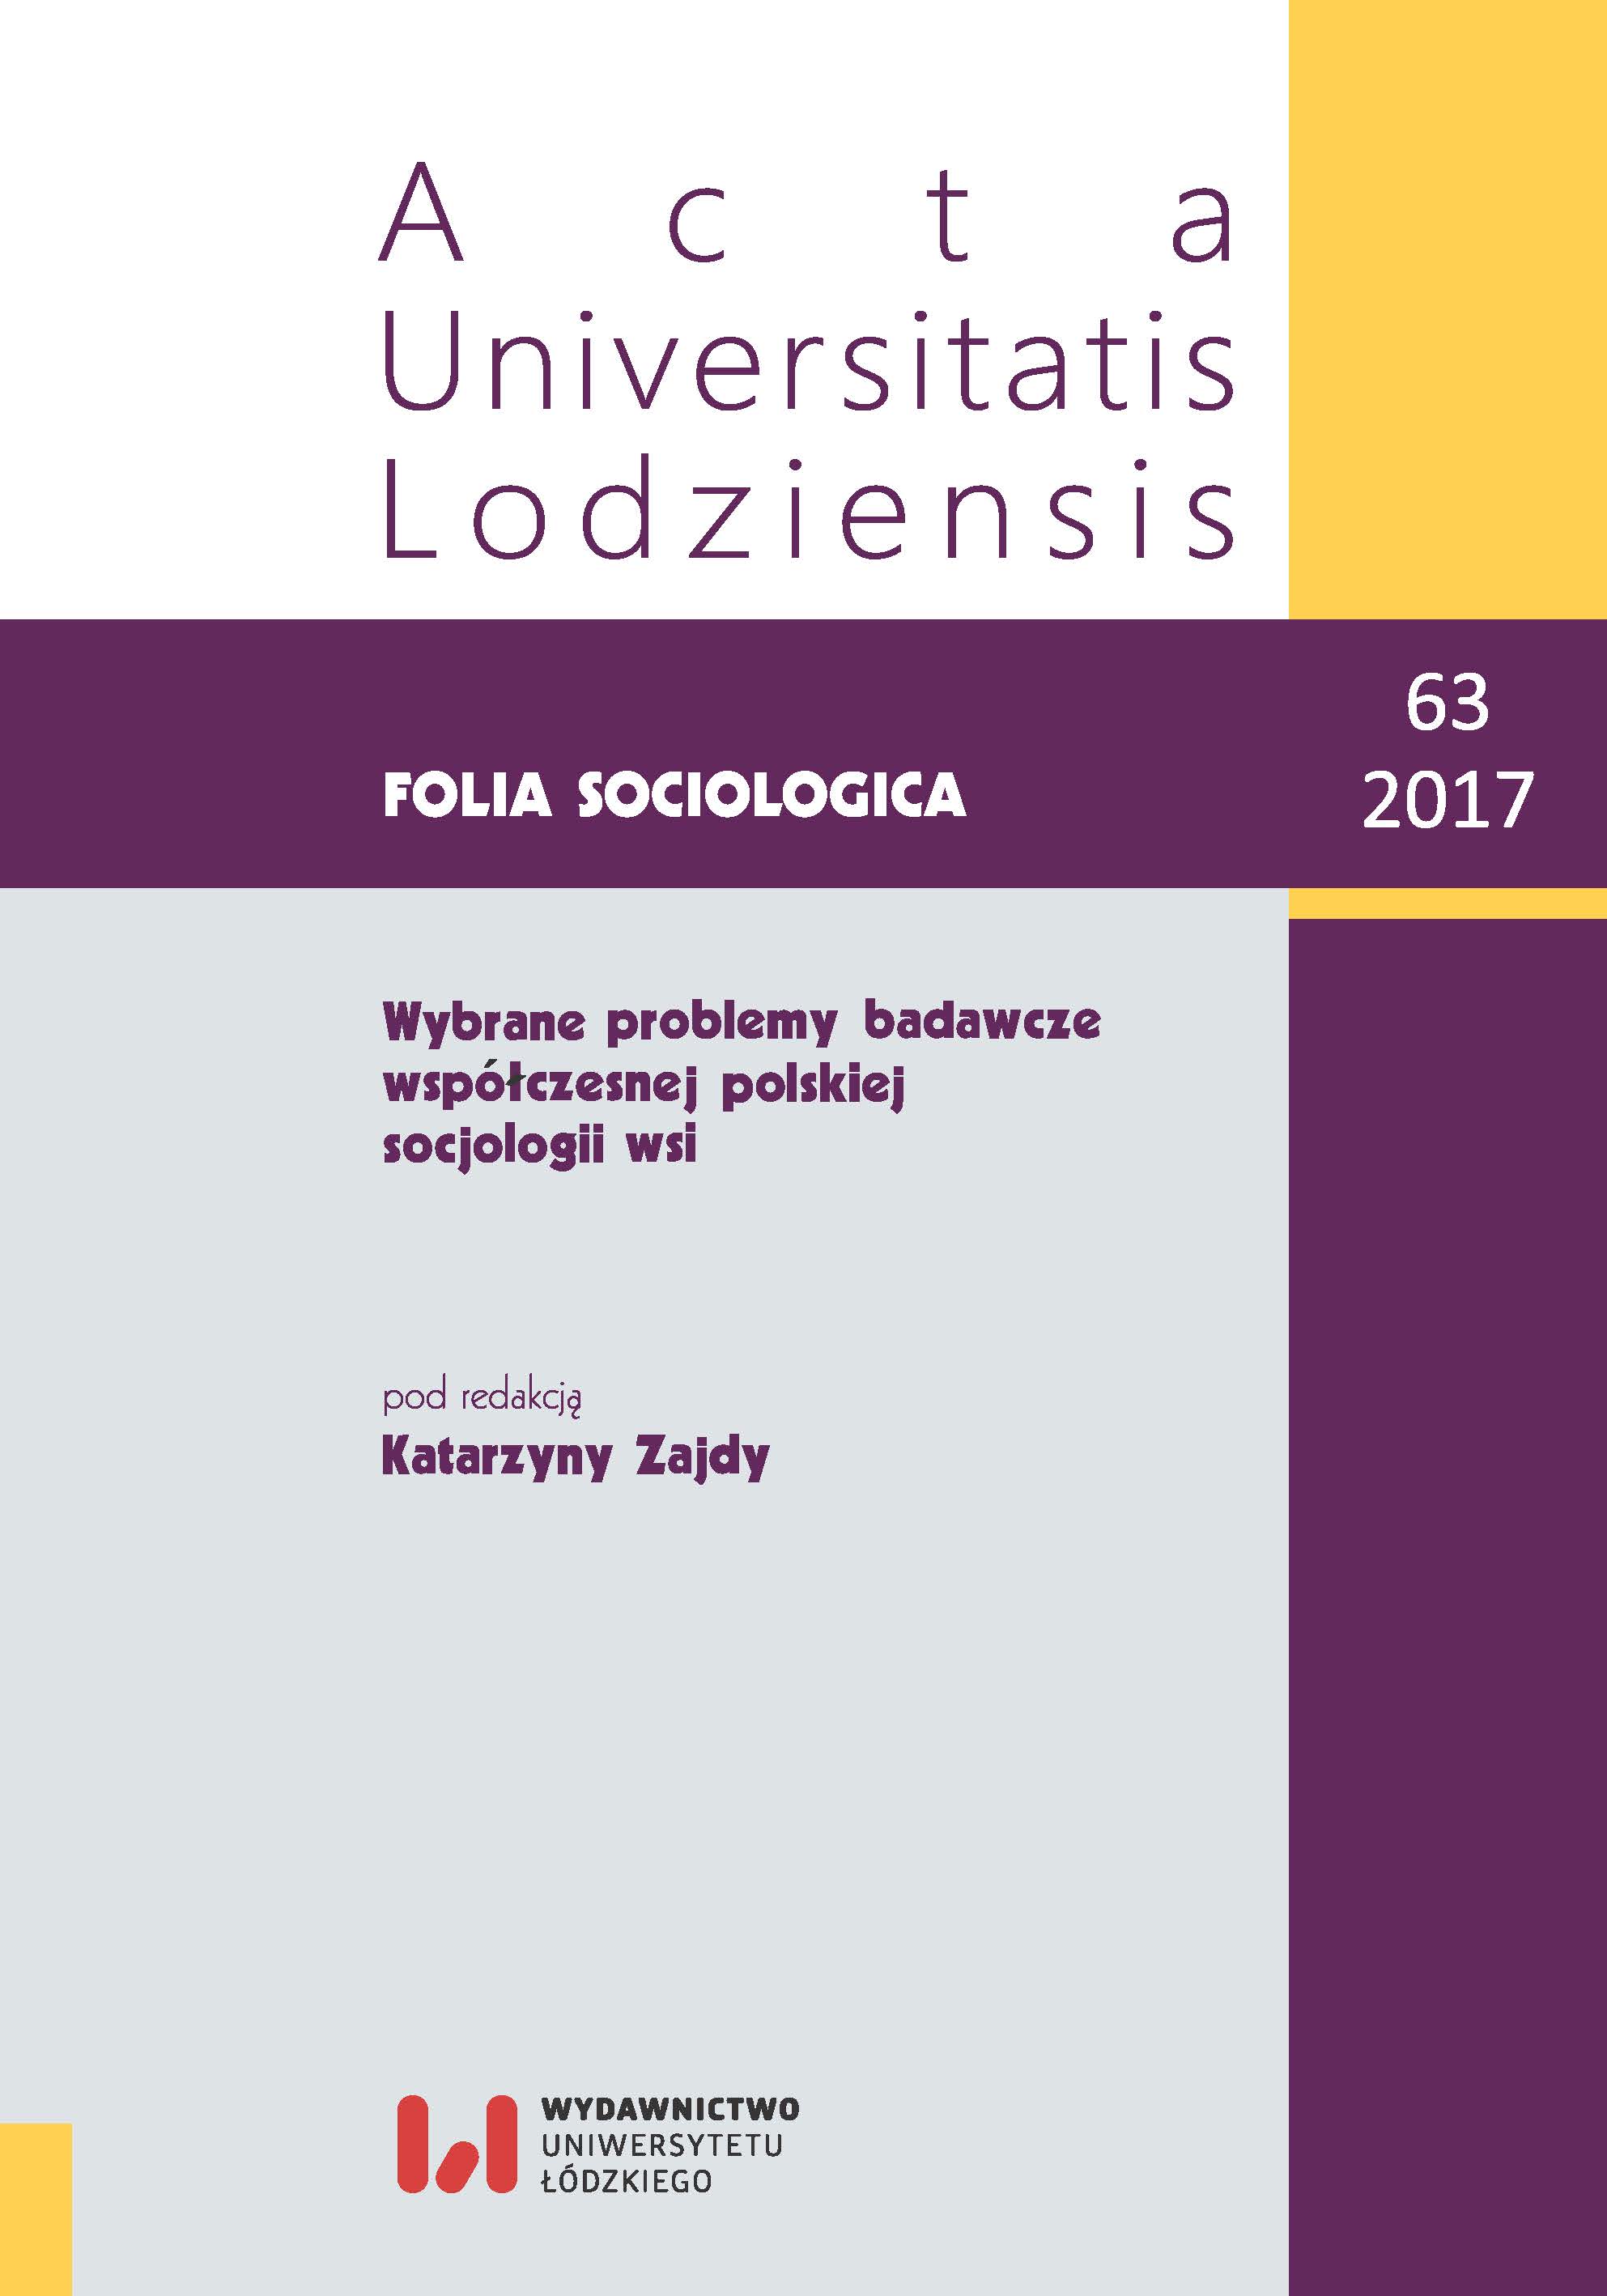 Educational Projects Co-Financed by the European Union Implemented in the Rural Areas of Lodzkie Region. Case Study of 6 Municipalities – Reasons for Applying and Effects of Carried out Initiatives Cover Image